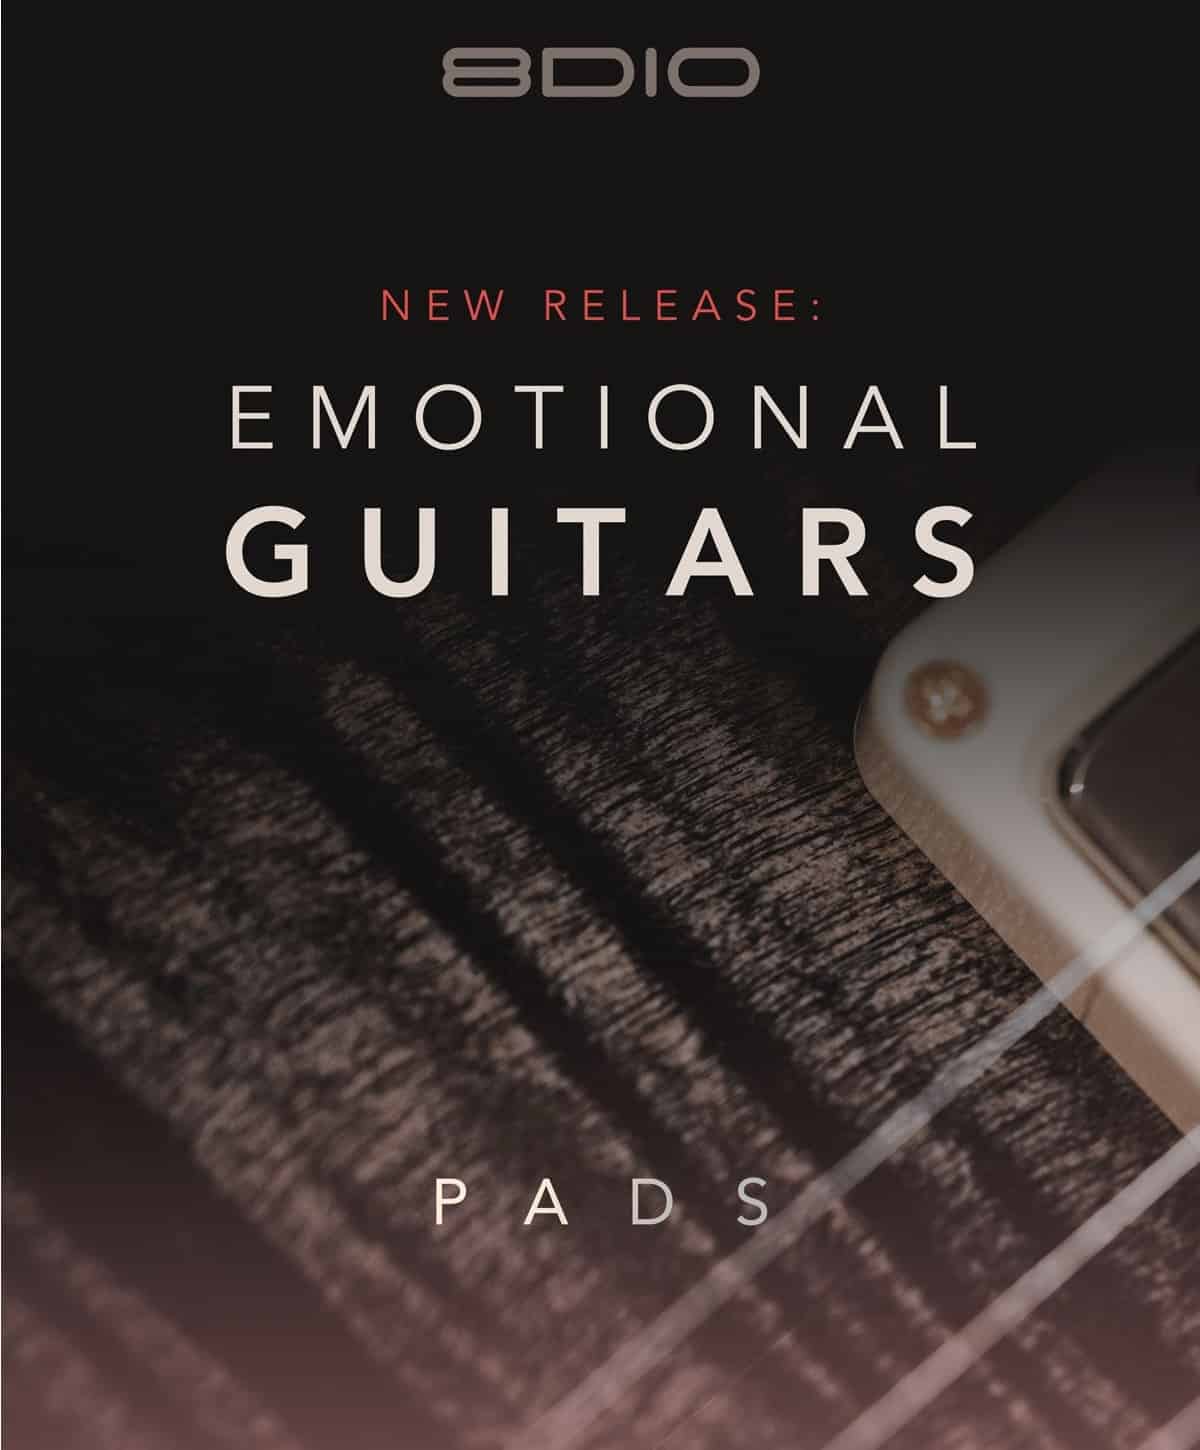 8Dio-launches-Emotional-Guitars-Pads